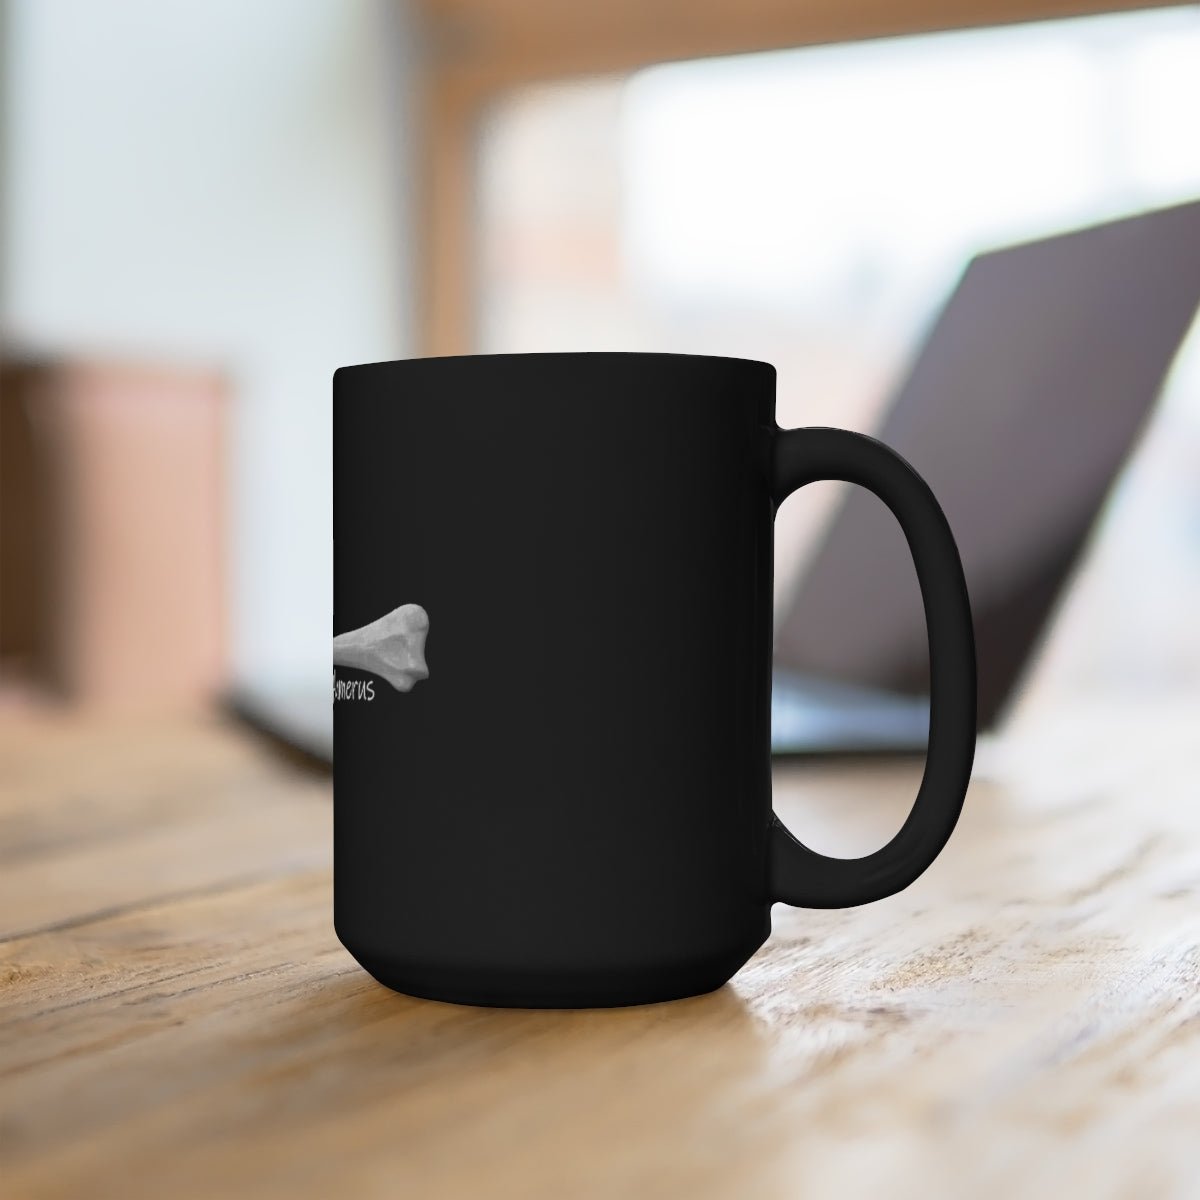 Now This is Humerus Black Mug 15oz for Osteologists and Other Brilliant People